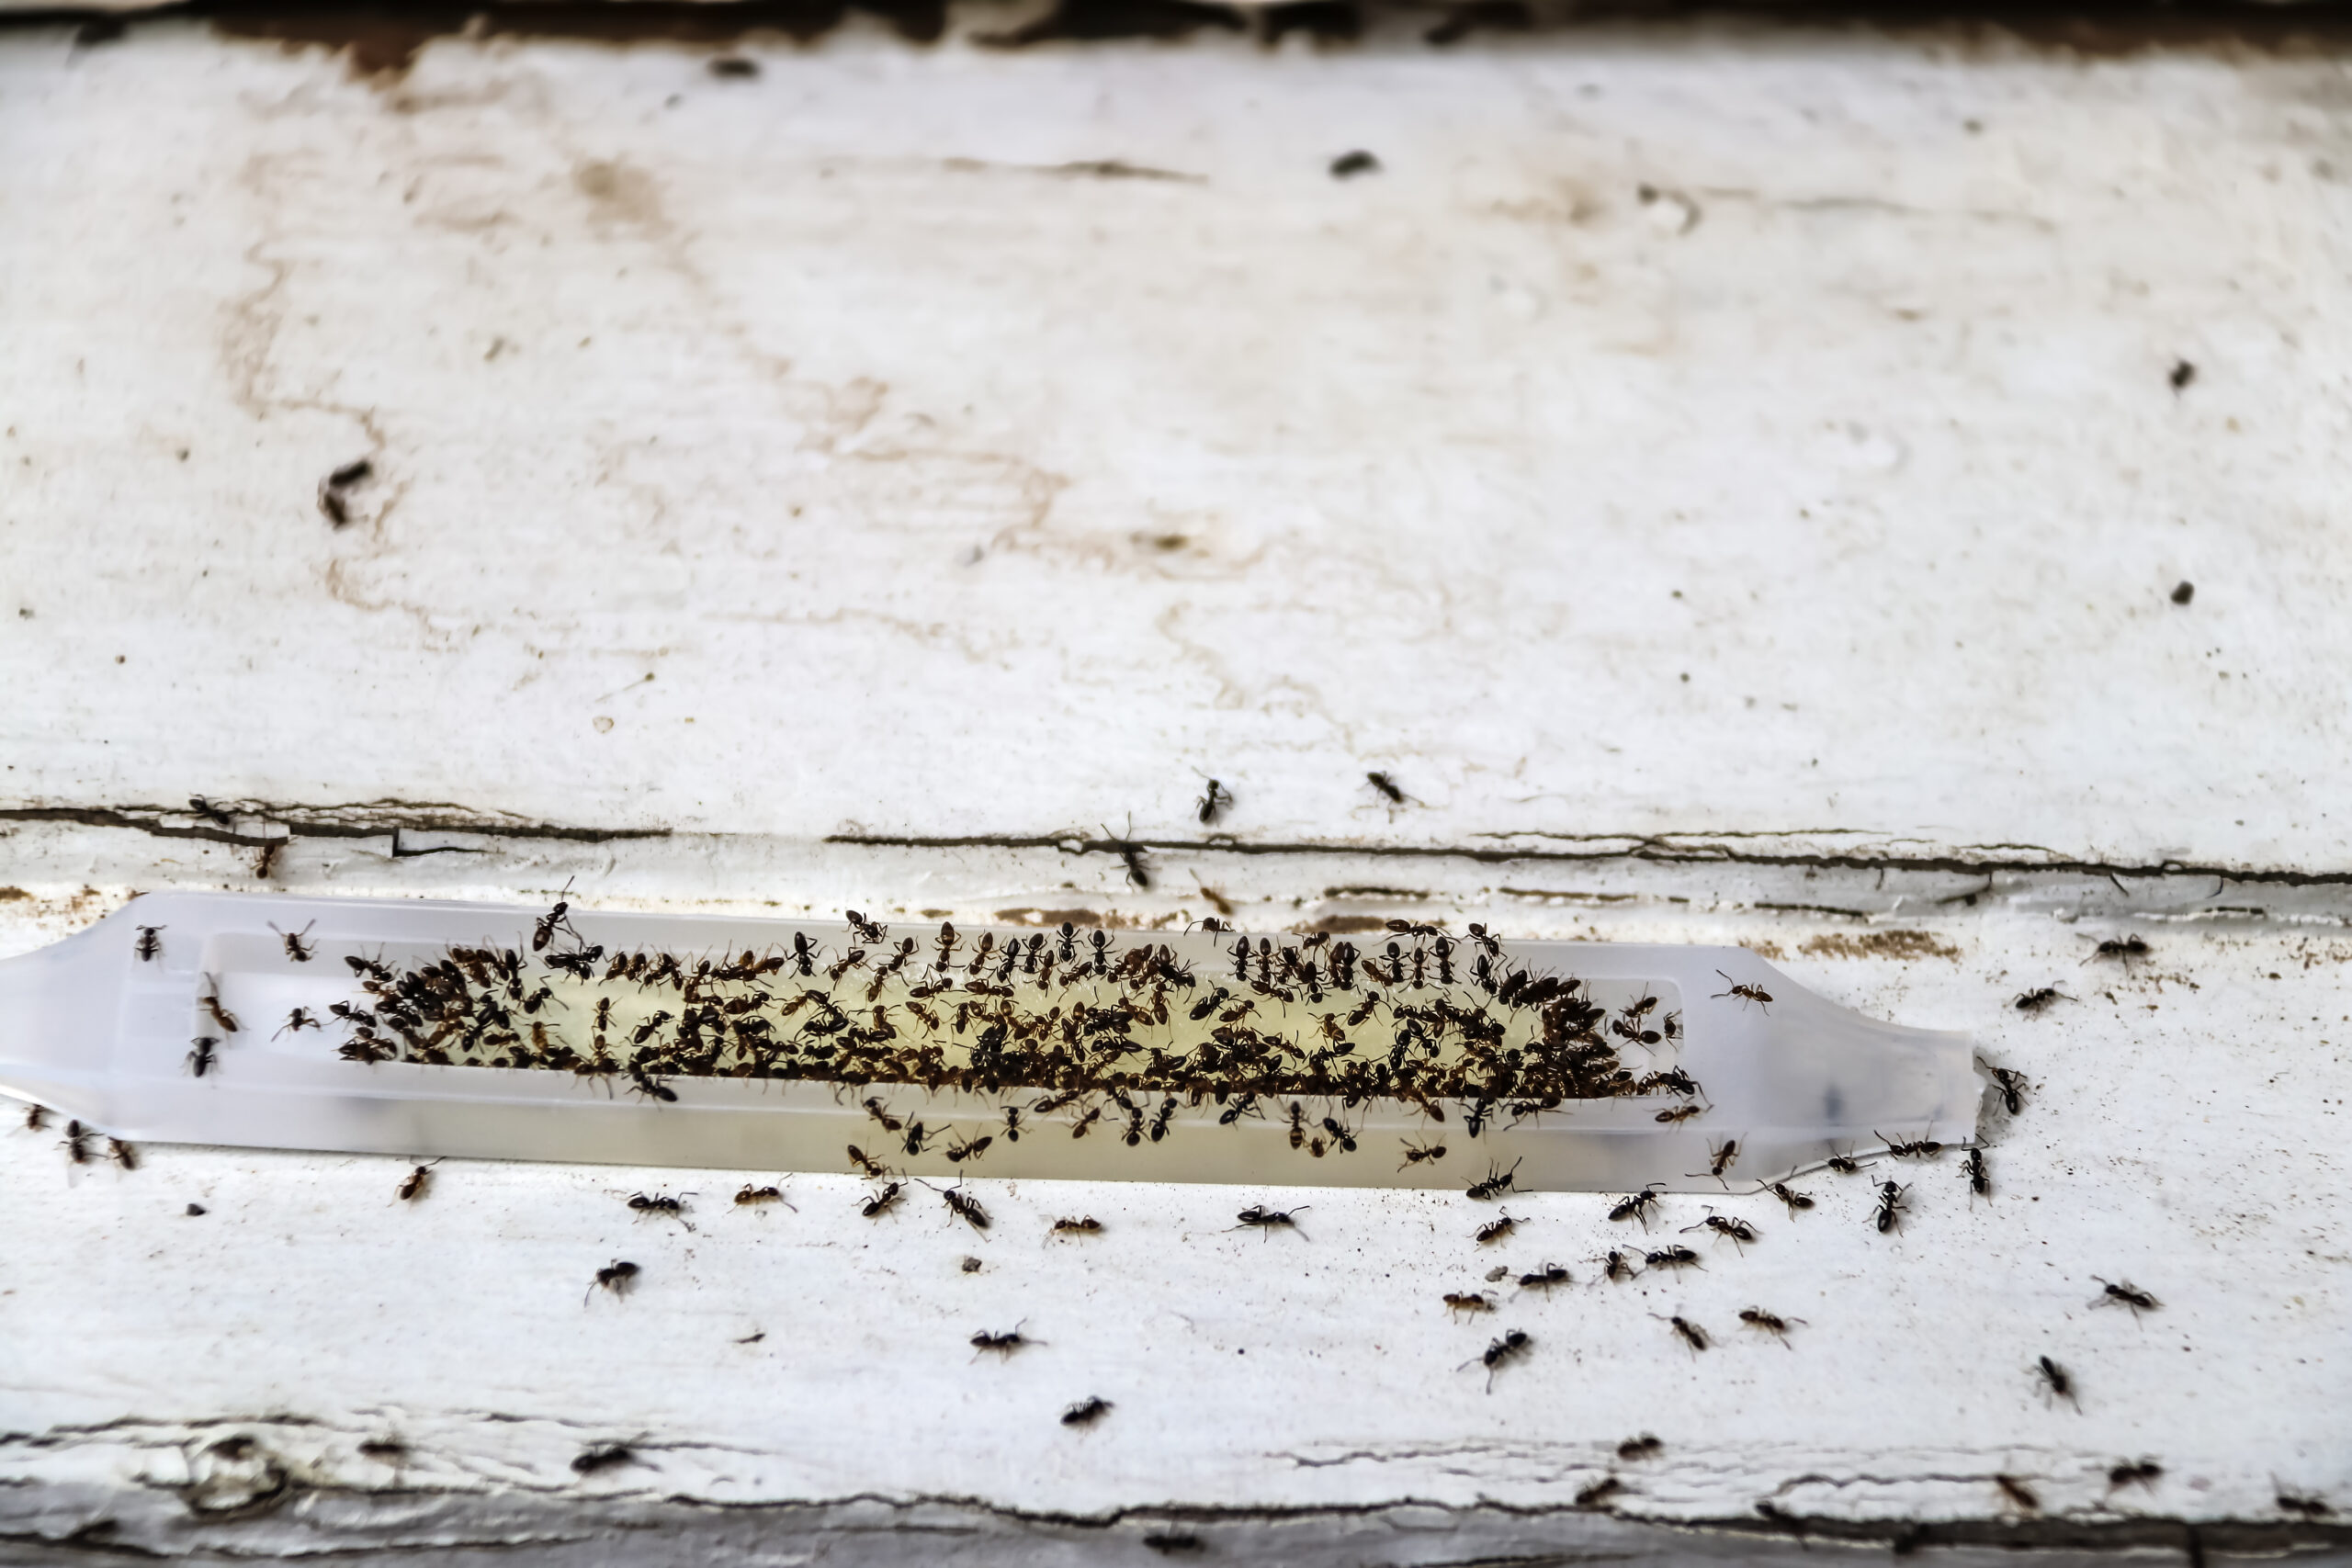 Ant poison trap filled with ants - dead and alive - sitting on old wood - shallow focus